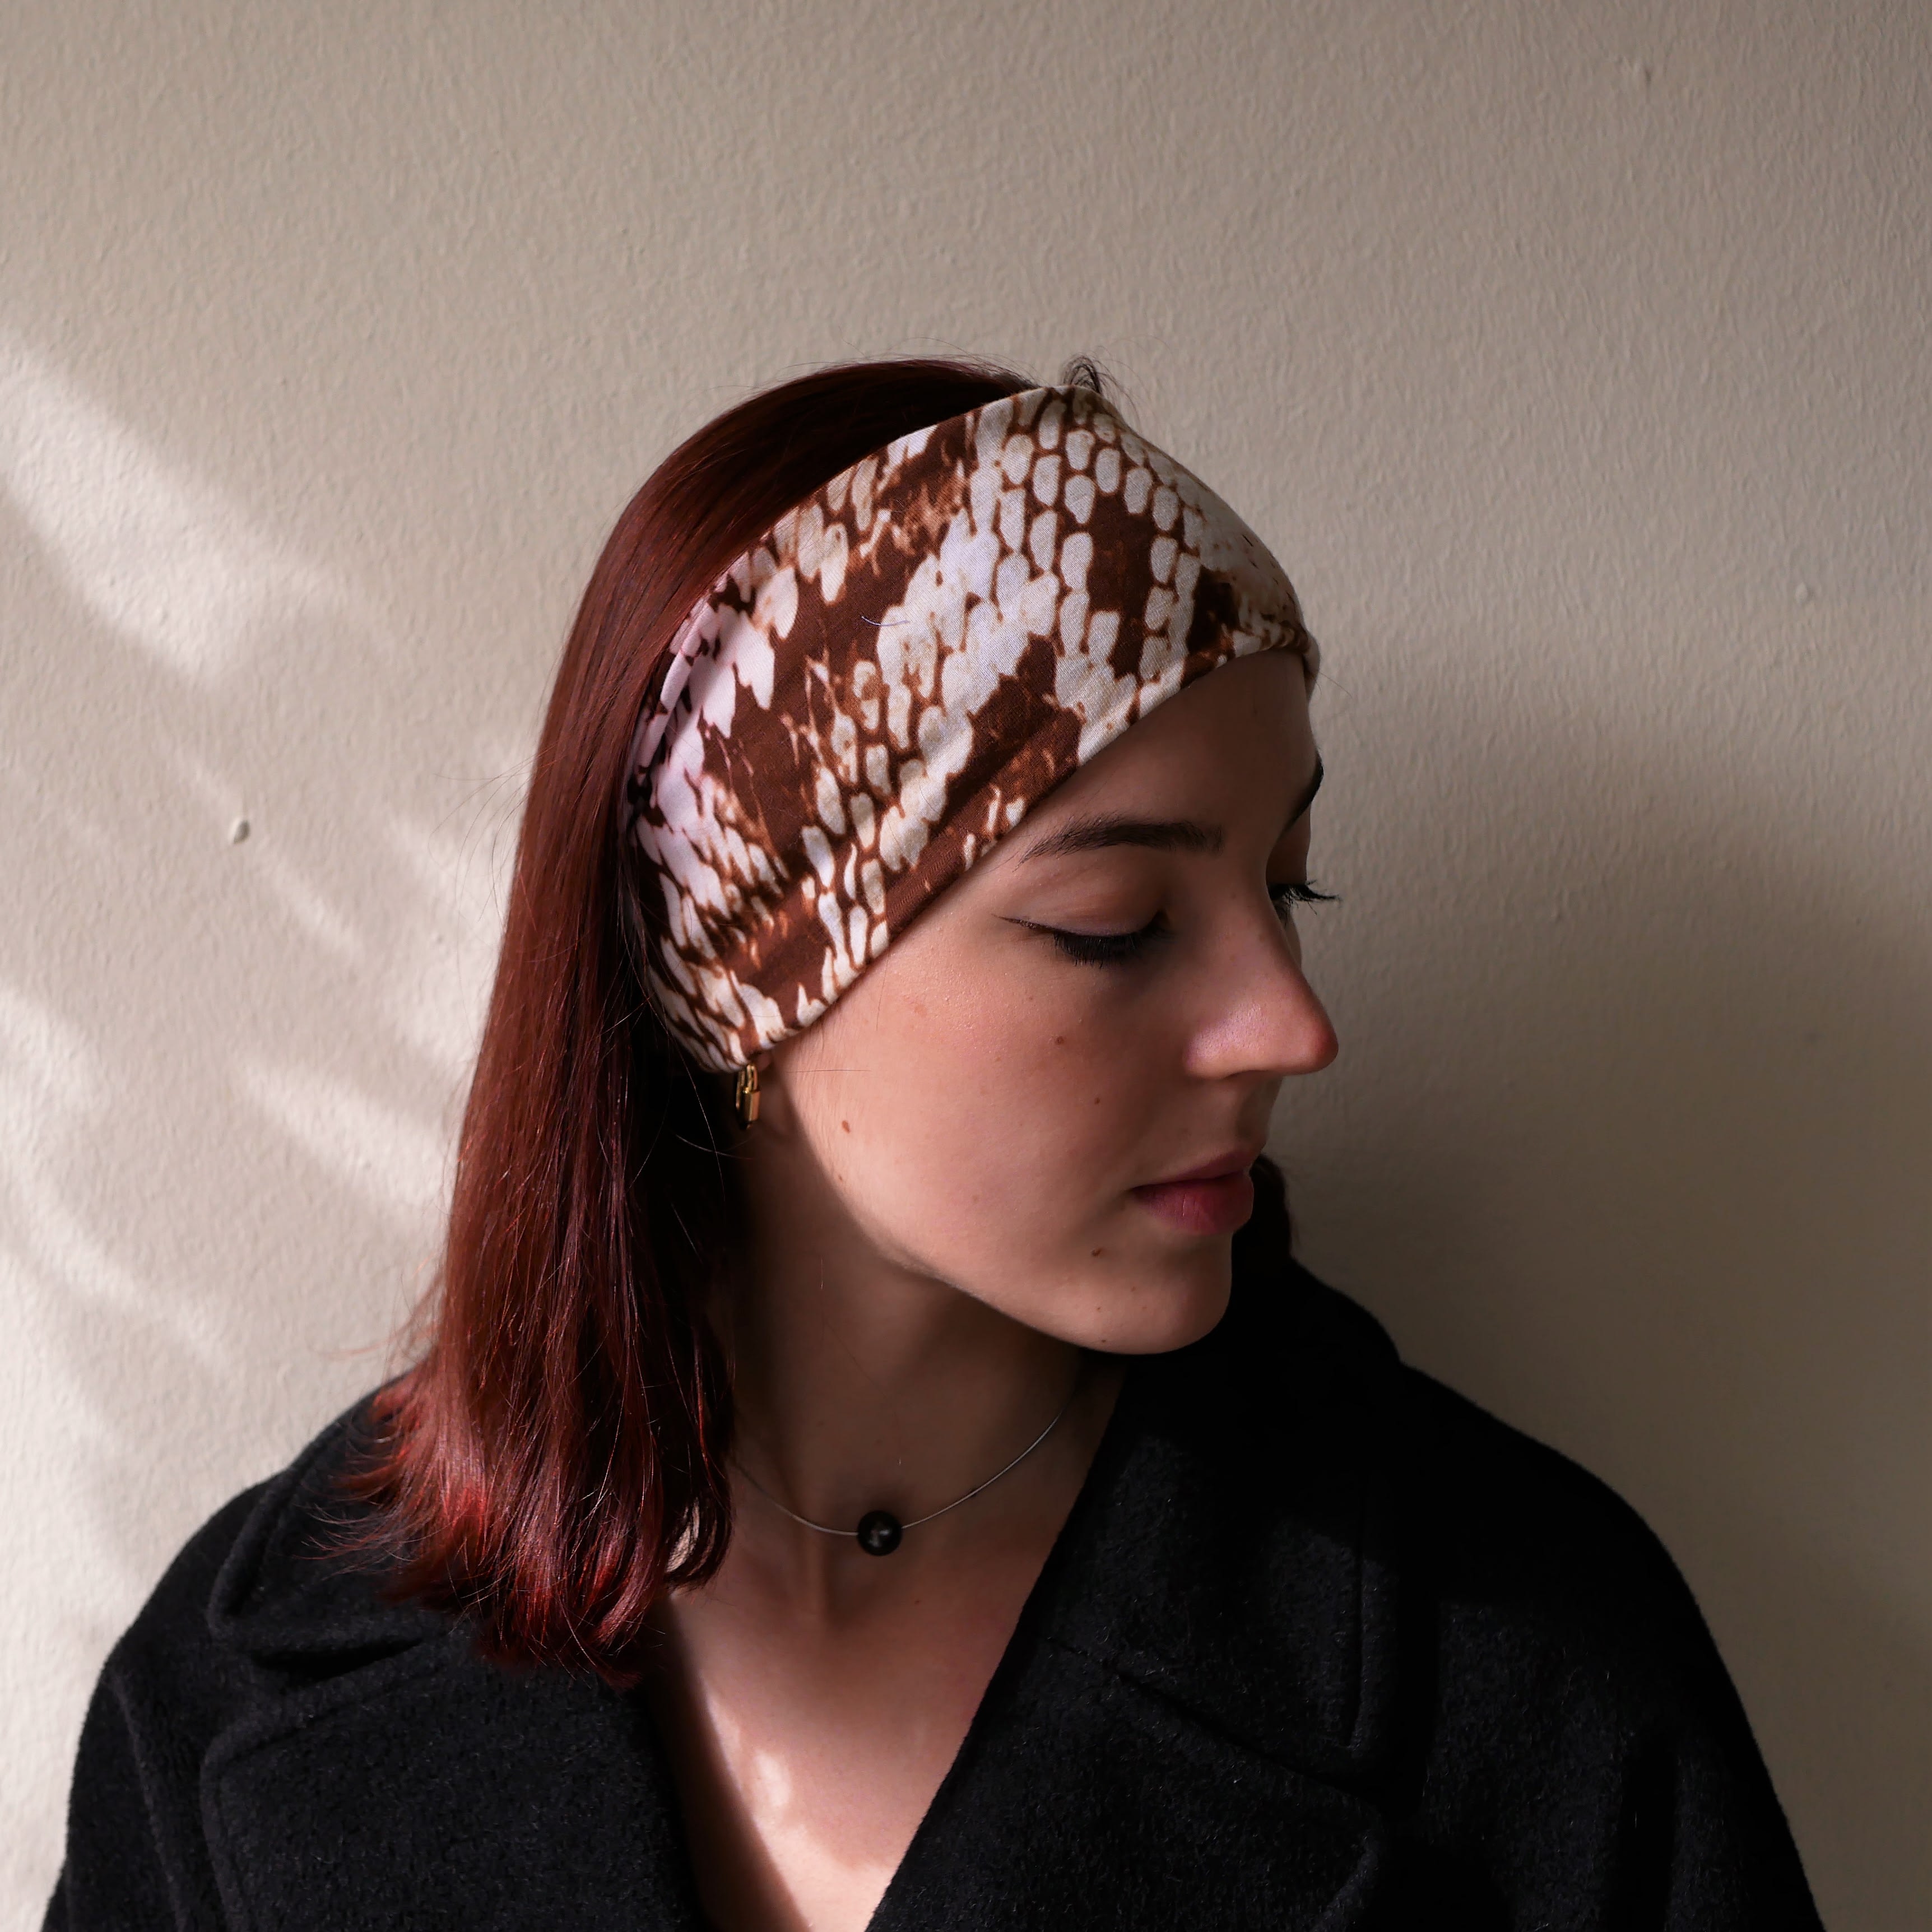 Brown and white double twist headband, wide headband, turban headband, yoga headband, workout headband